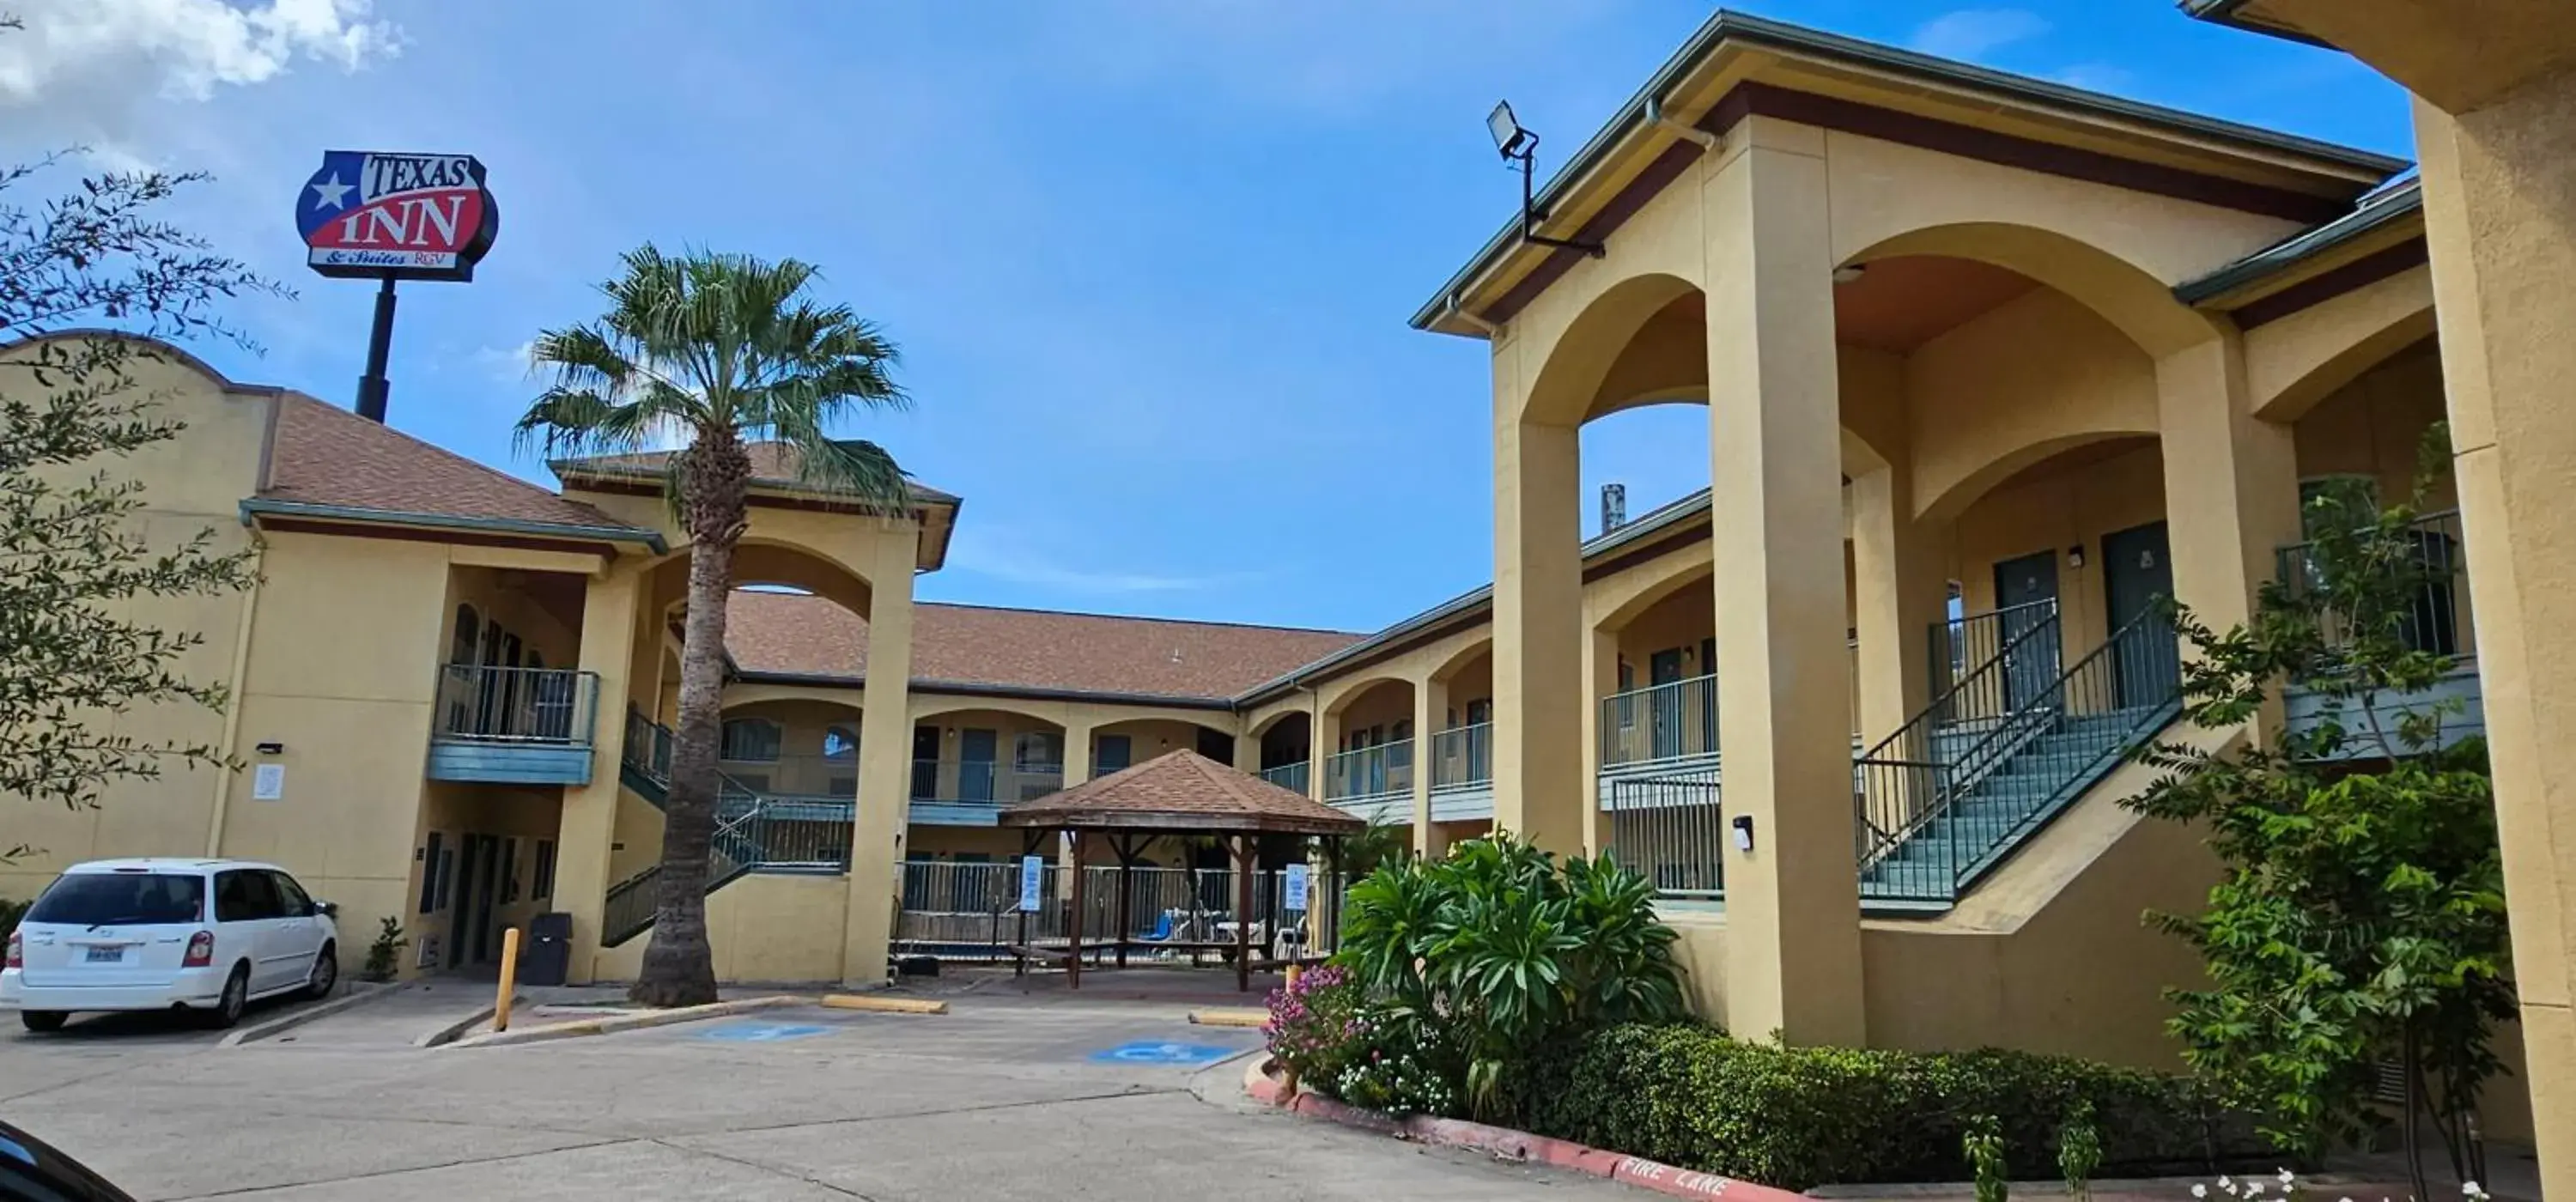 Property Building in Texas Inn and Suites RGV